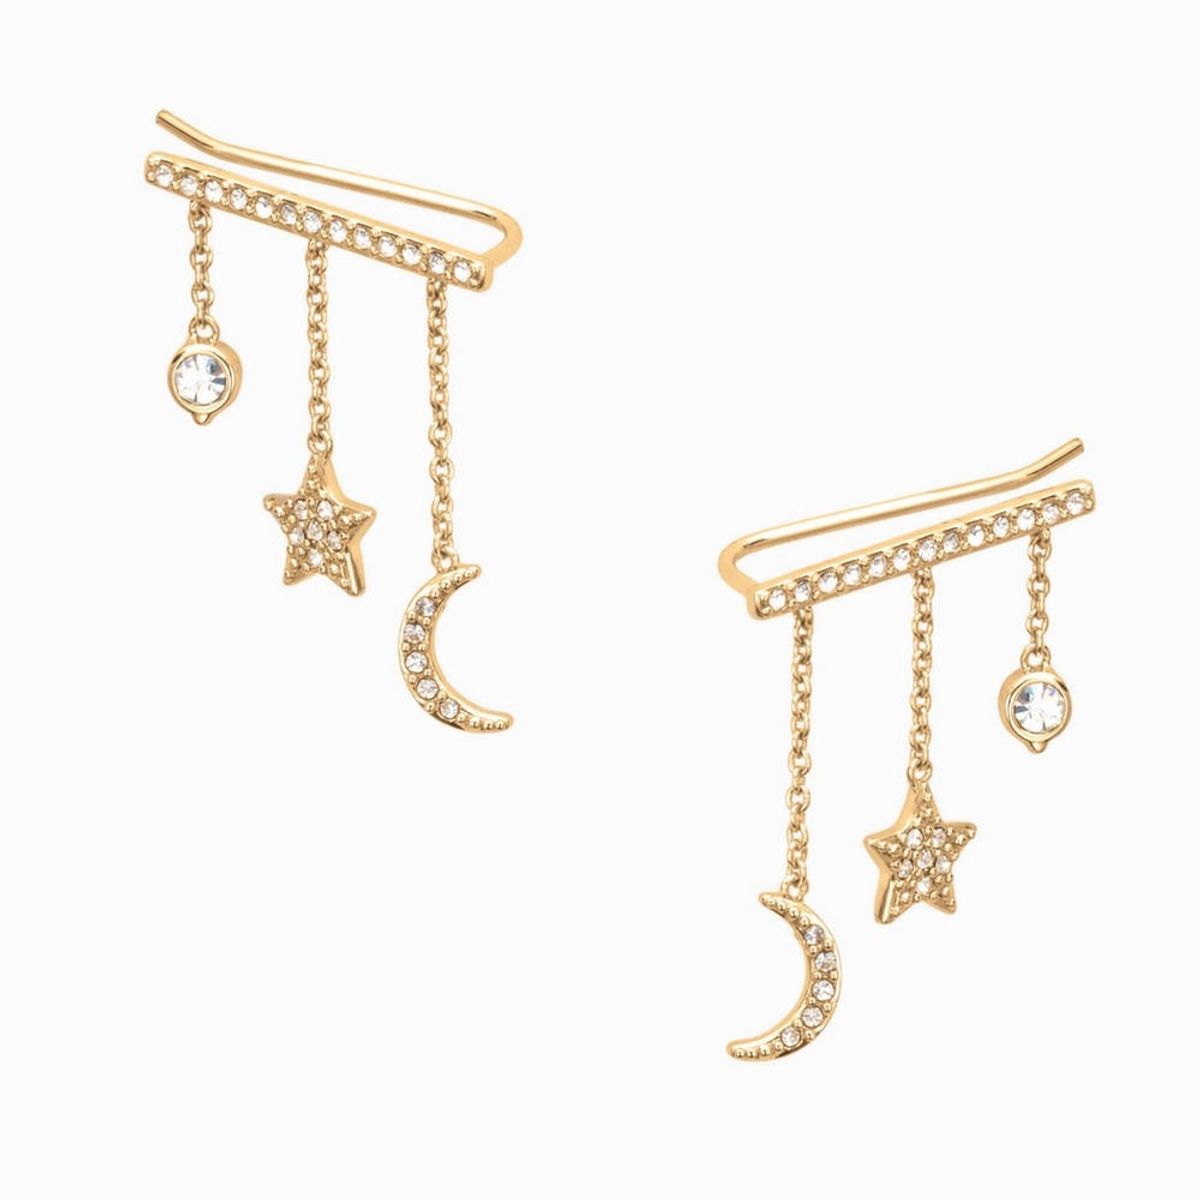 Stella & Dot’s Jewelry Collaboration Is Here to Fill Your Holiday Wish Lists